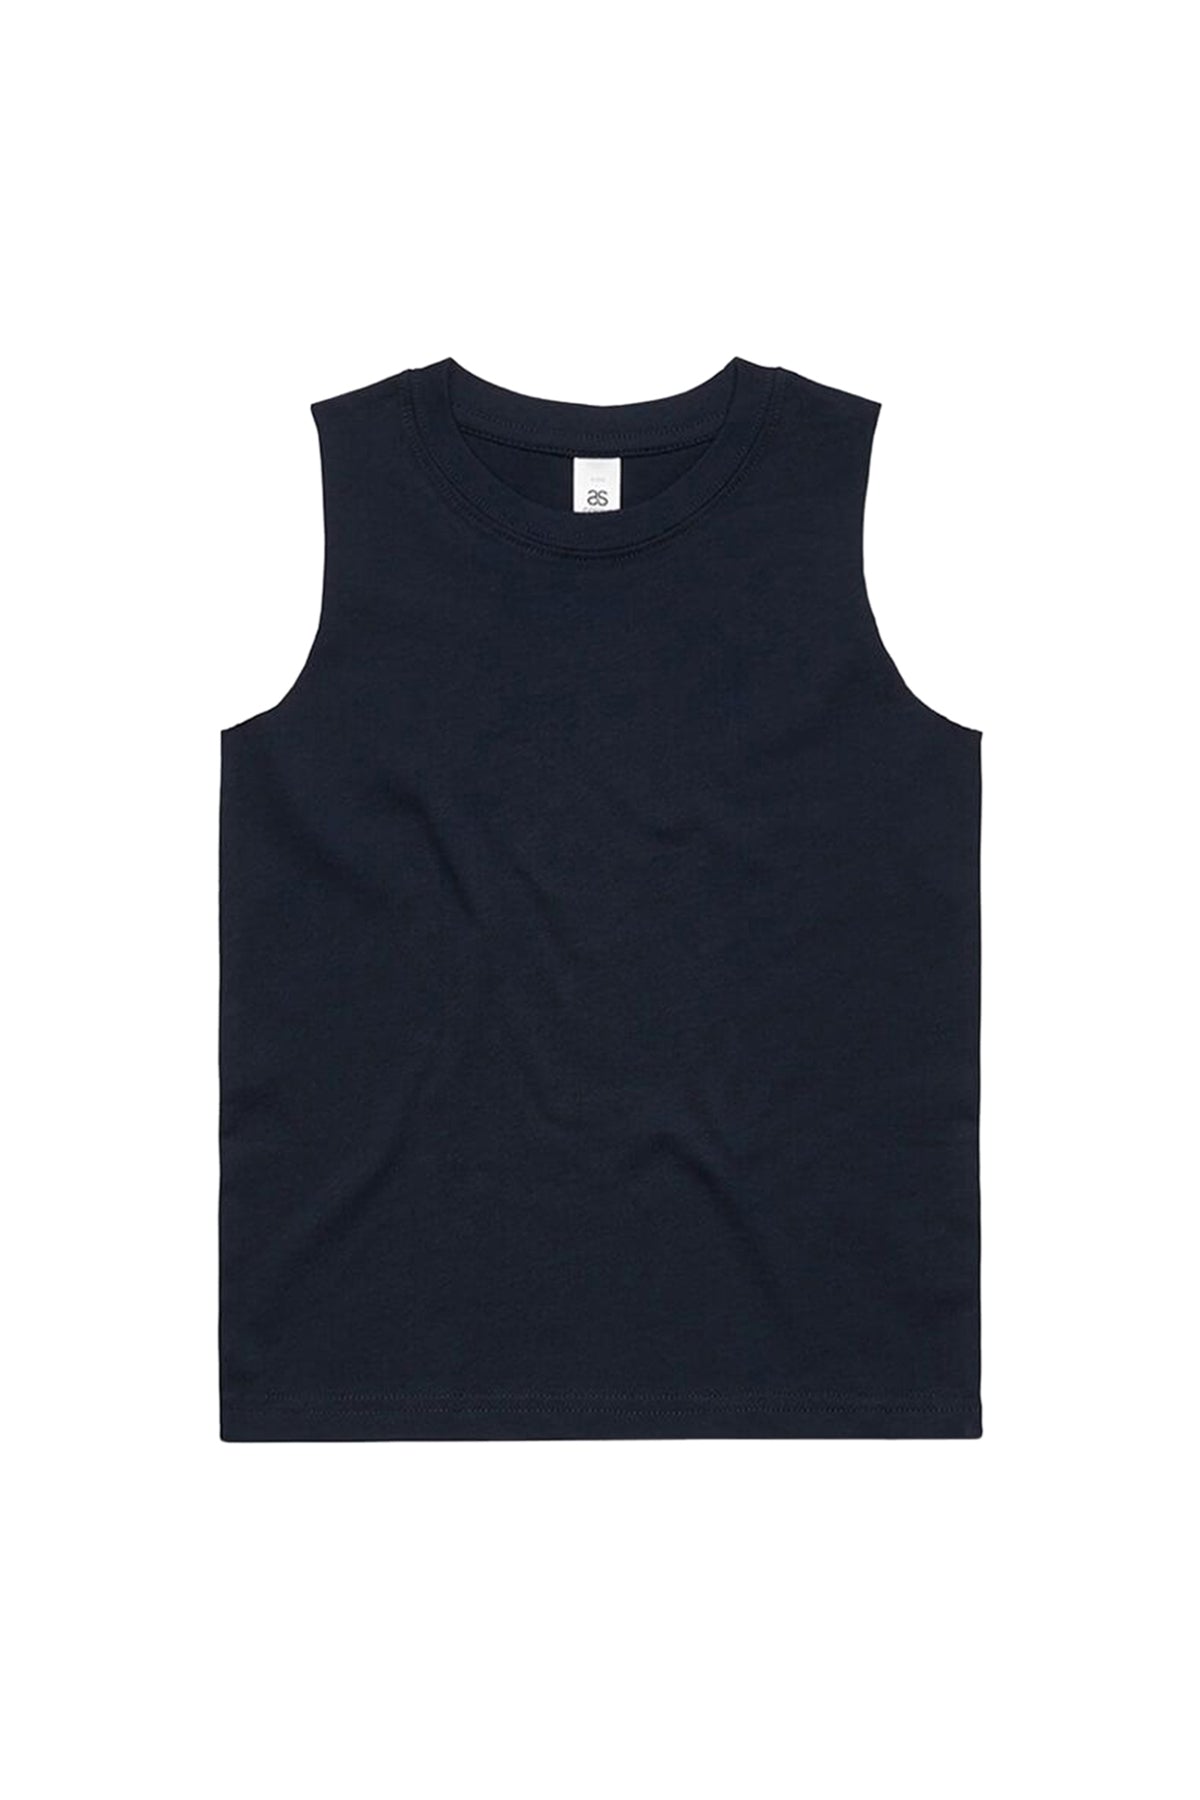 As Colour Youth Barnard Tank Black Front